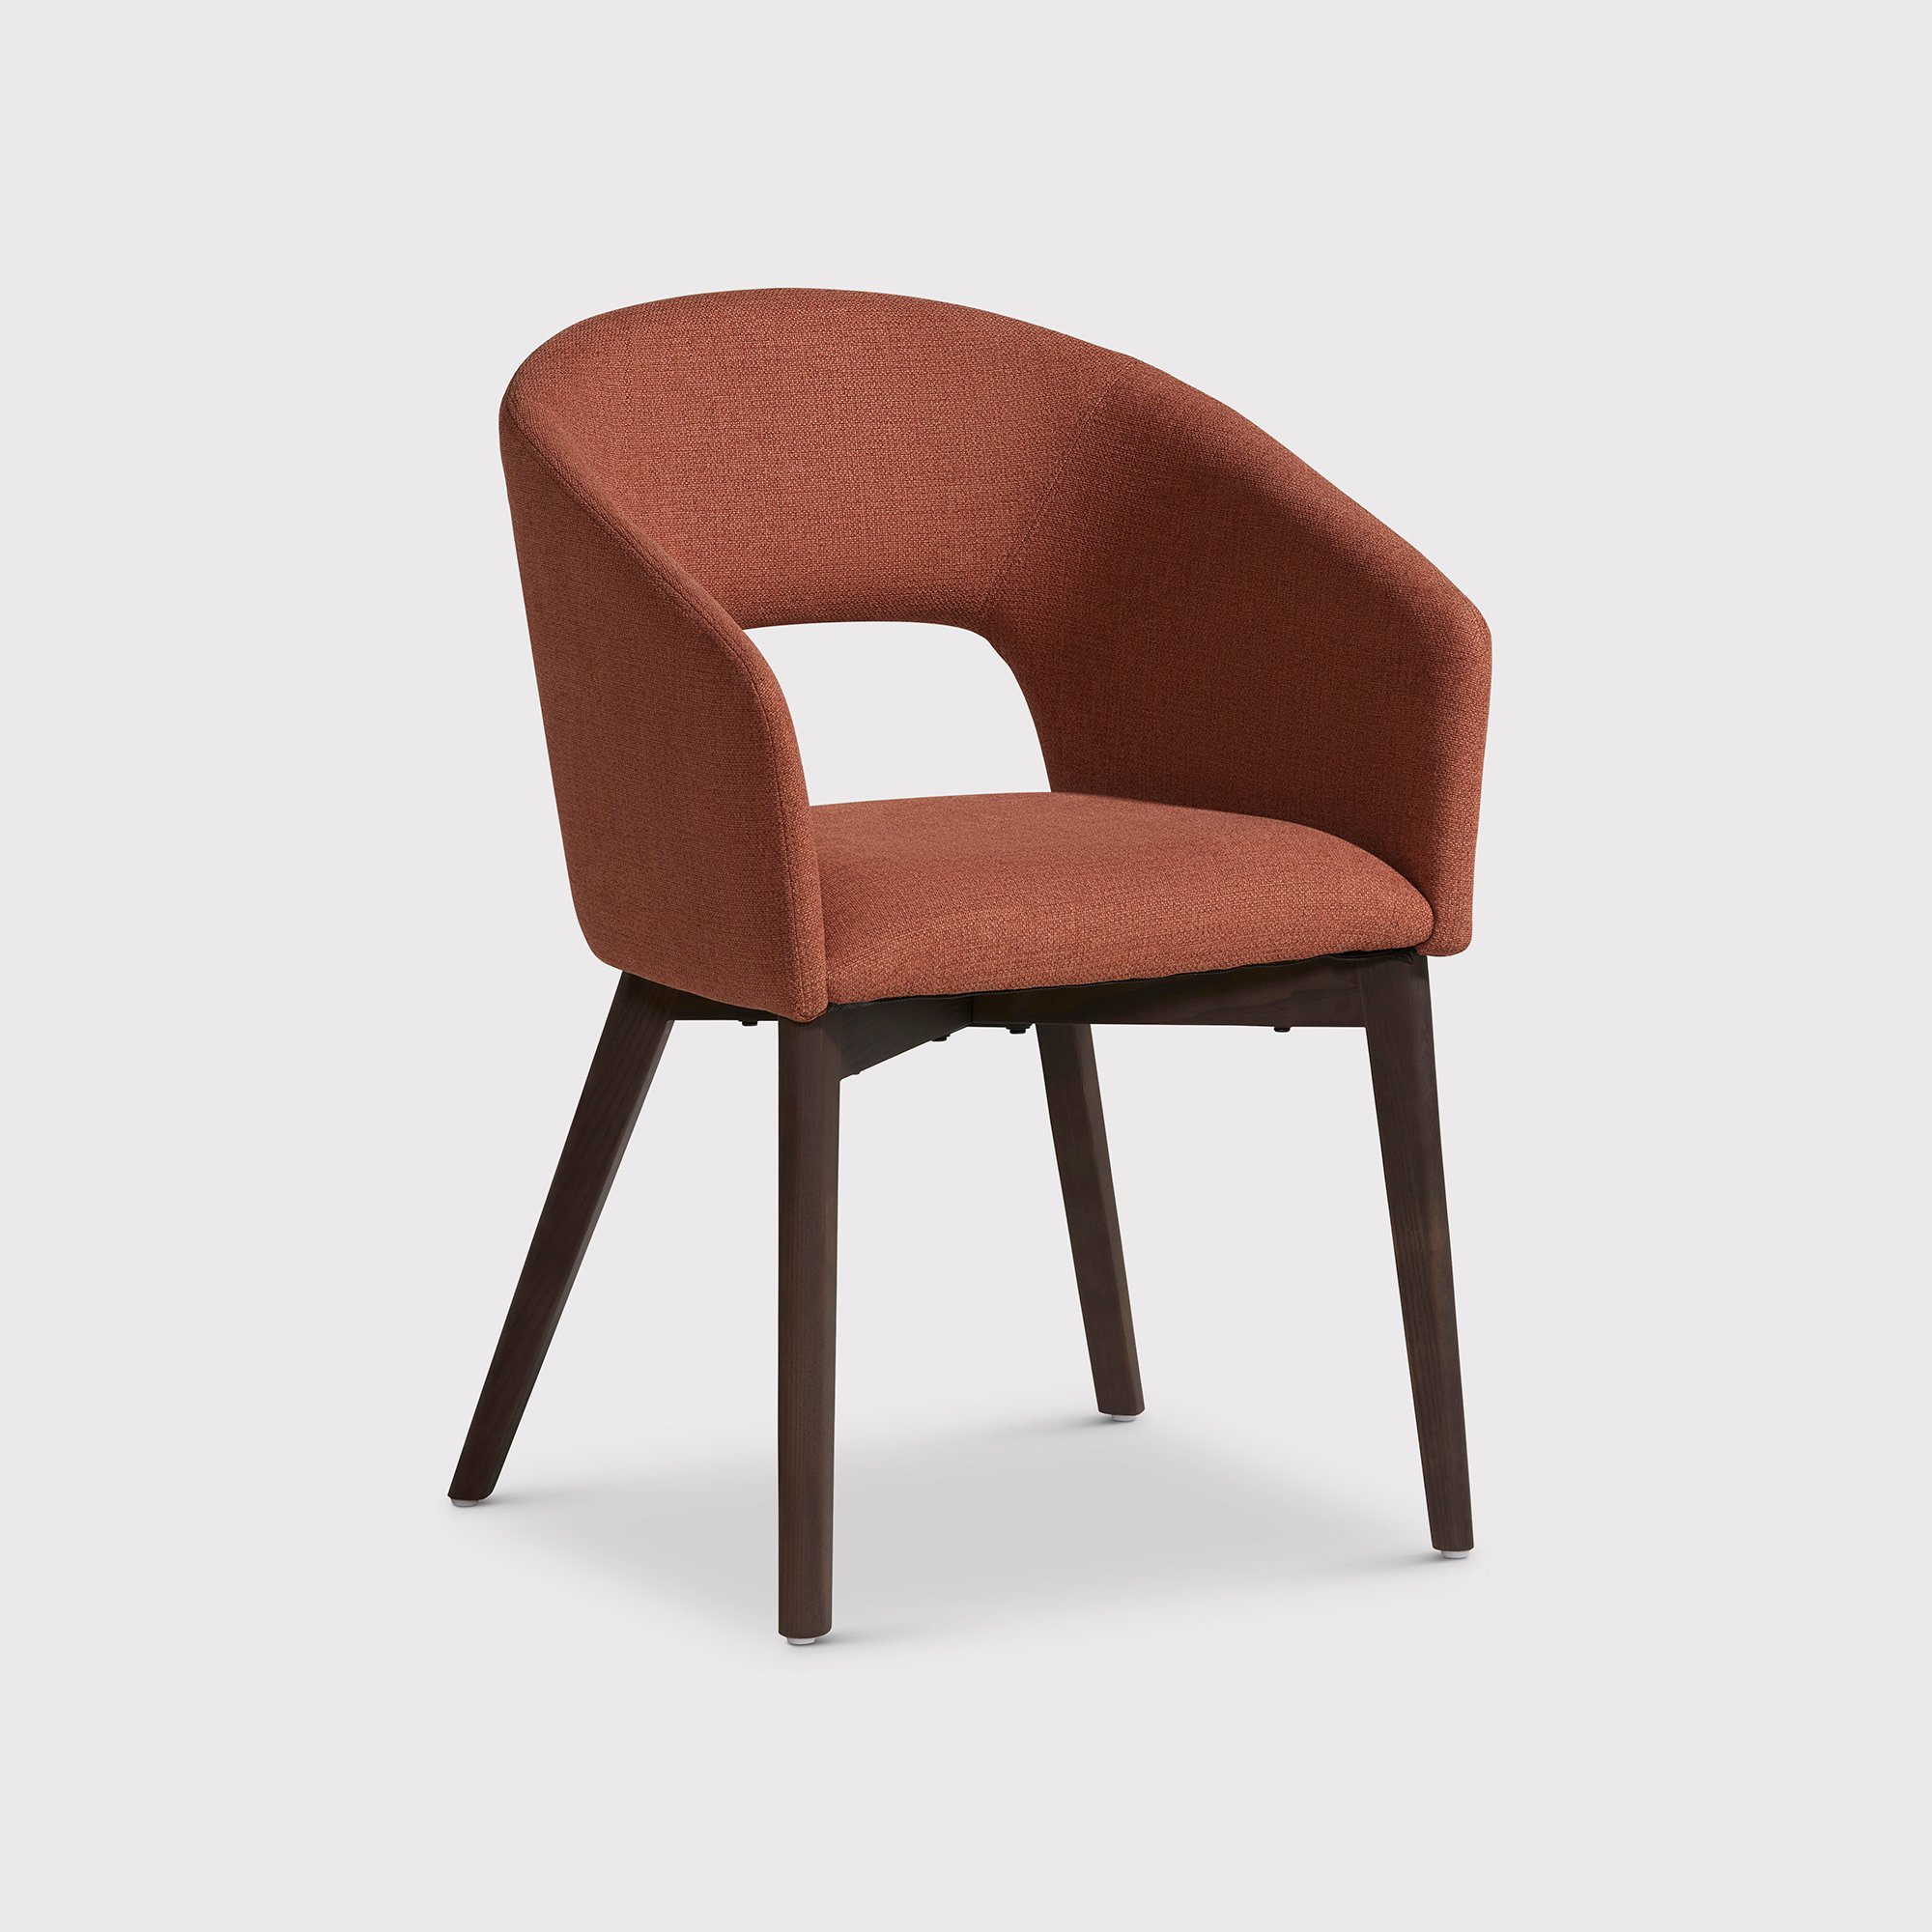 Tish Dining Chair, Brown Fabric | Barker & Stonehouse